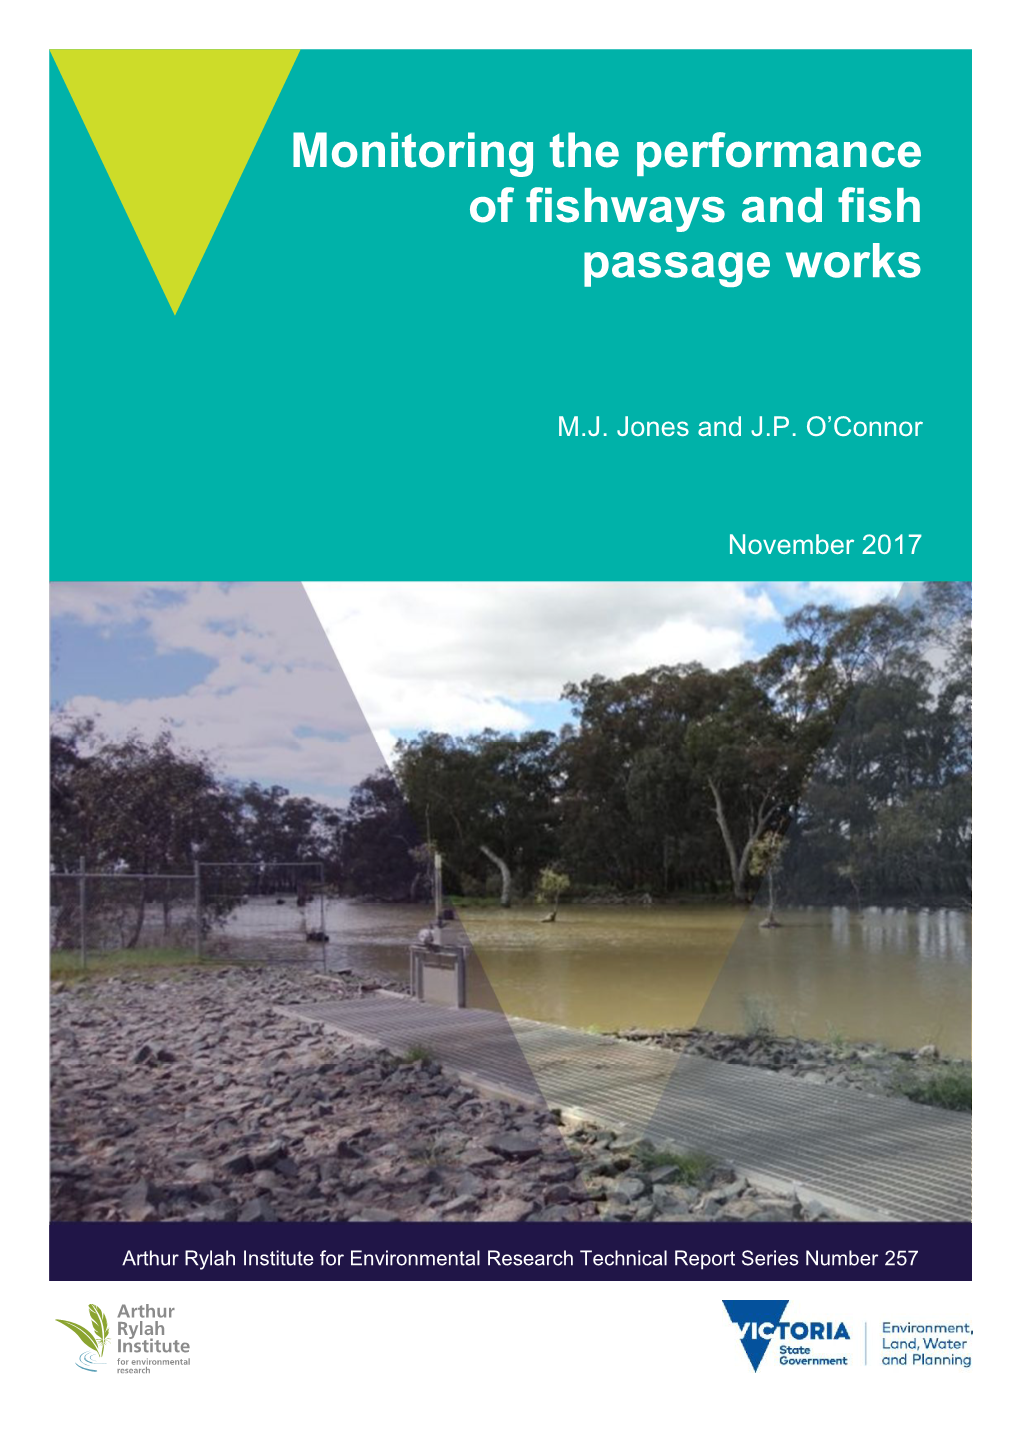 Monitoring the Performance of Fishways and Fish Passage Works